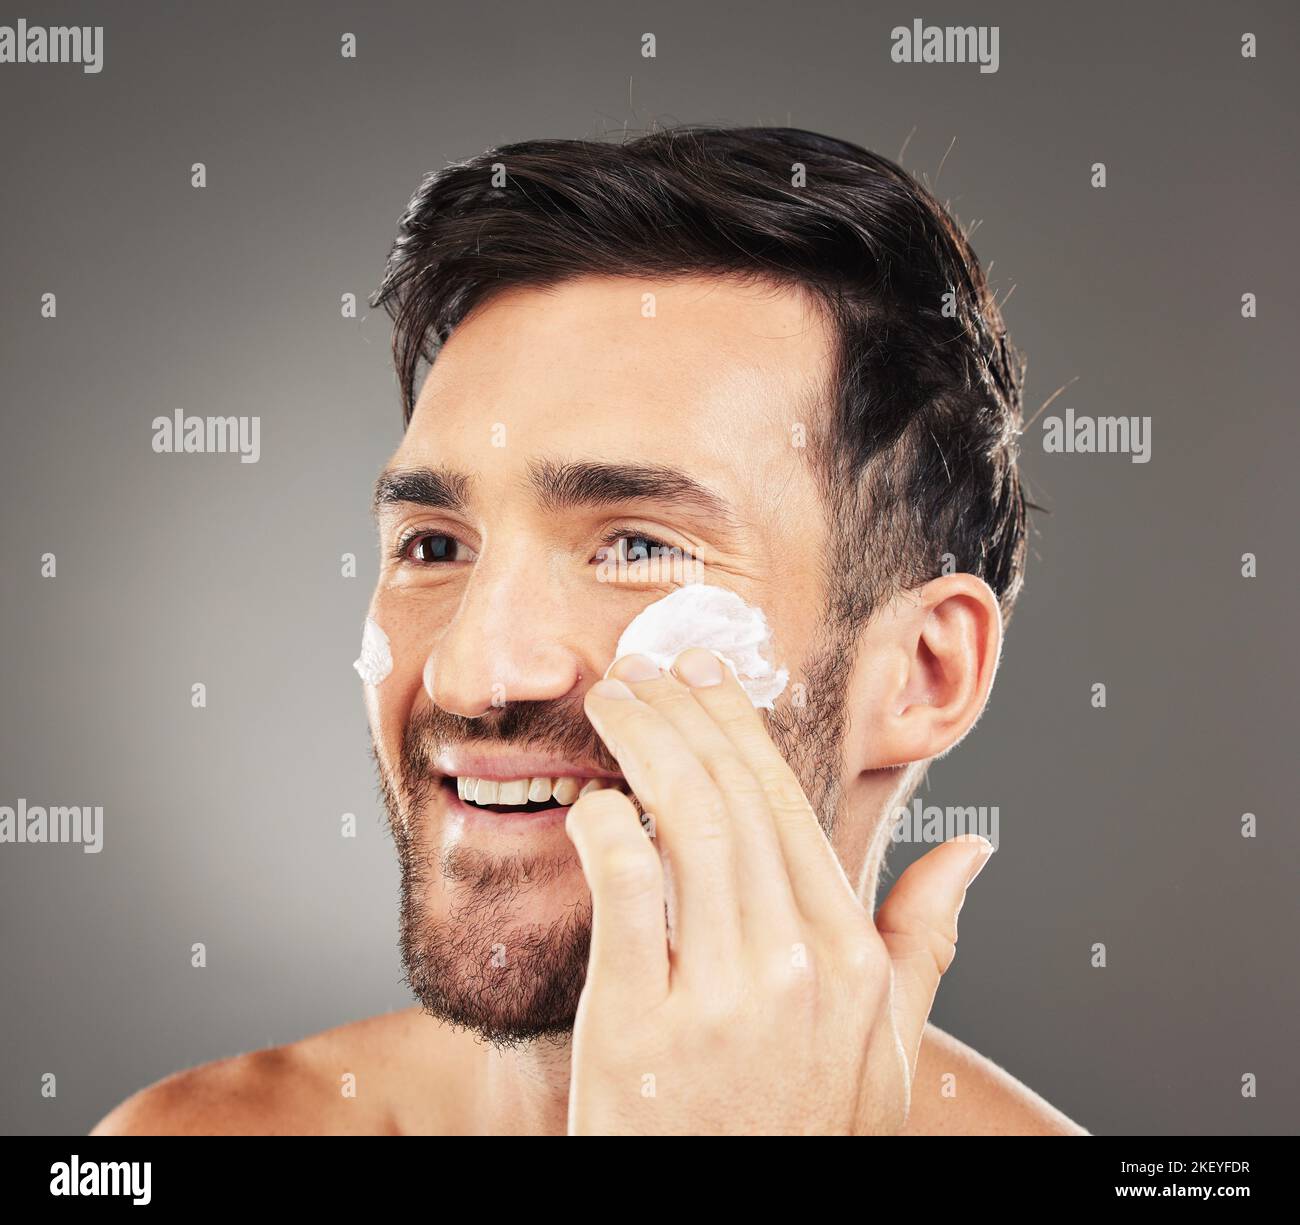 Skincare cream, face product and man with with dermatology ointment for acne prevention, beauty or self care. Facial cosmetics, healthcare treatment Stock Photo